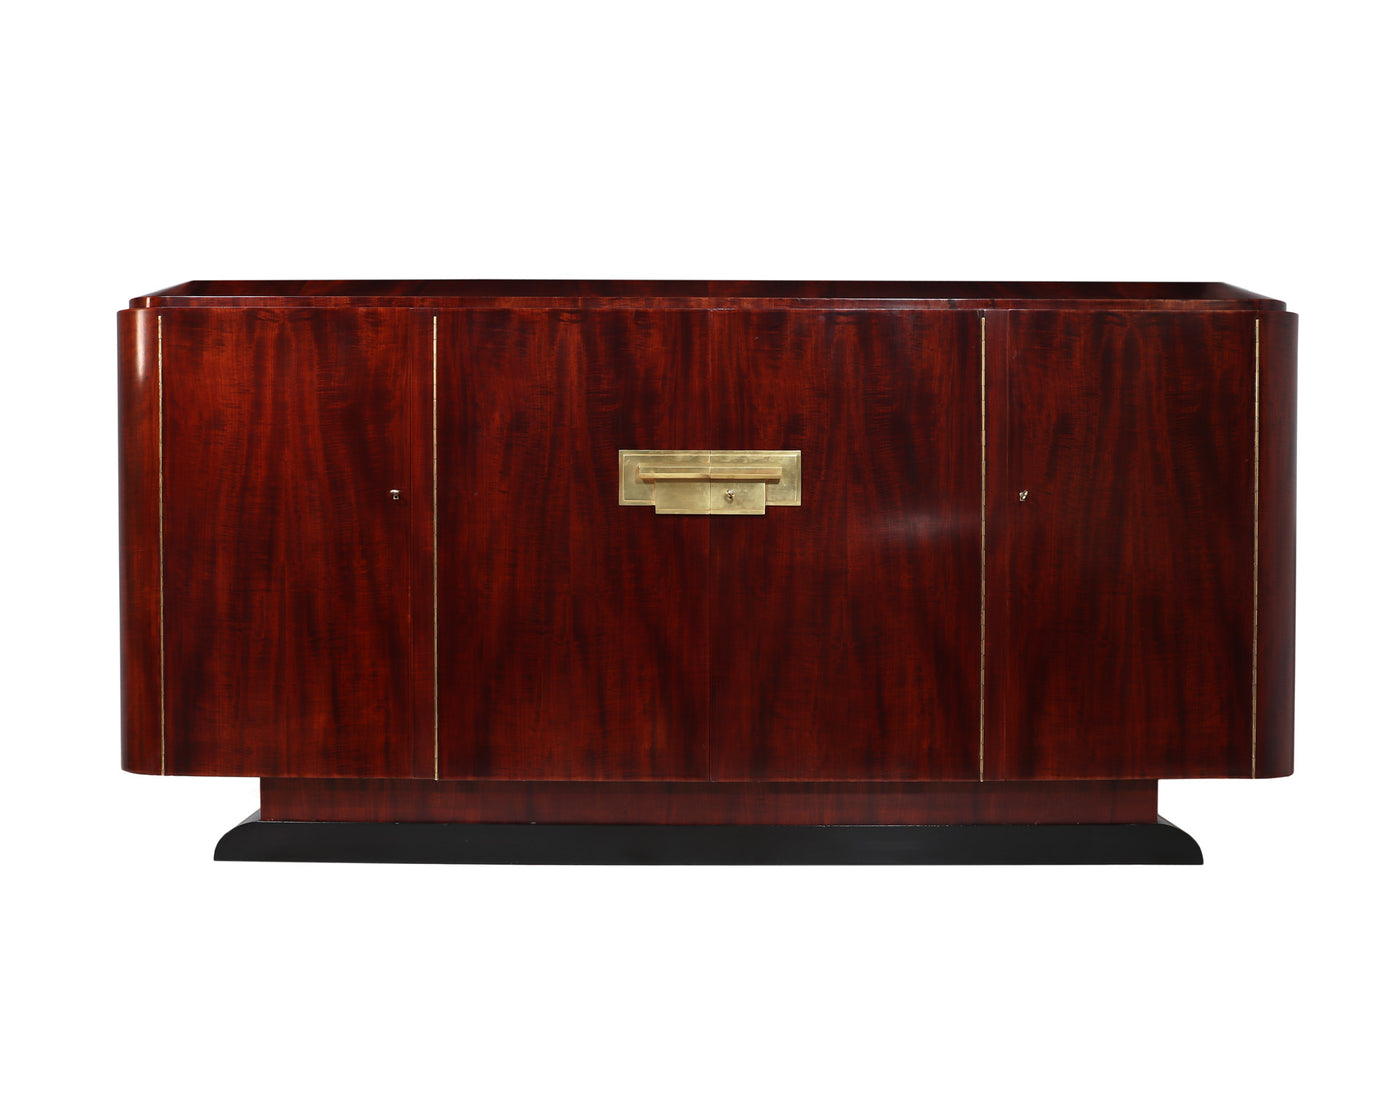 French Art Deco Sideboard in Red figured Sycamore front